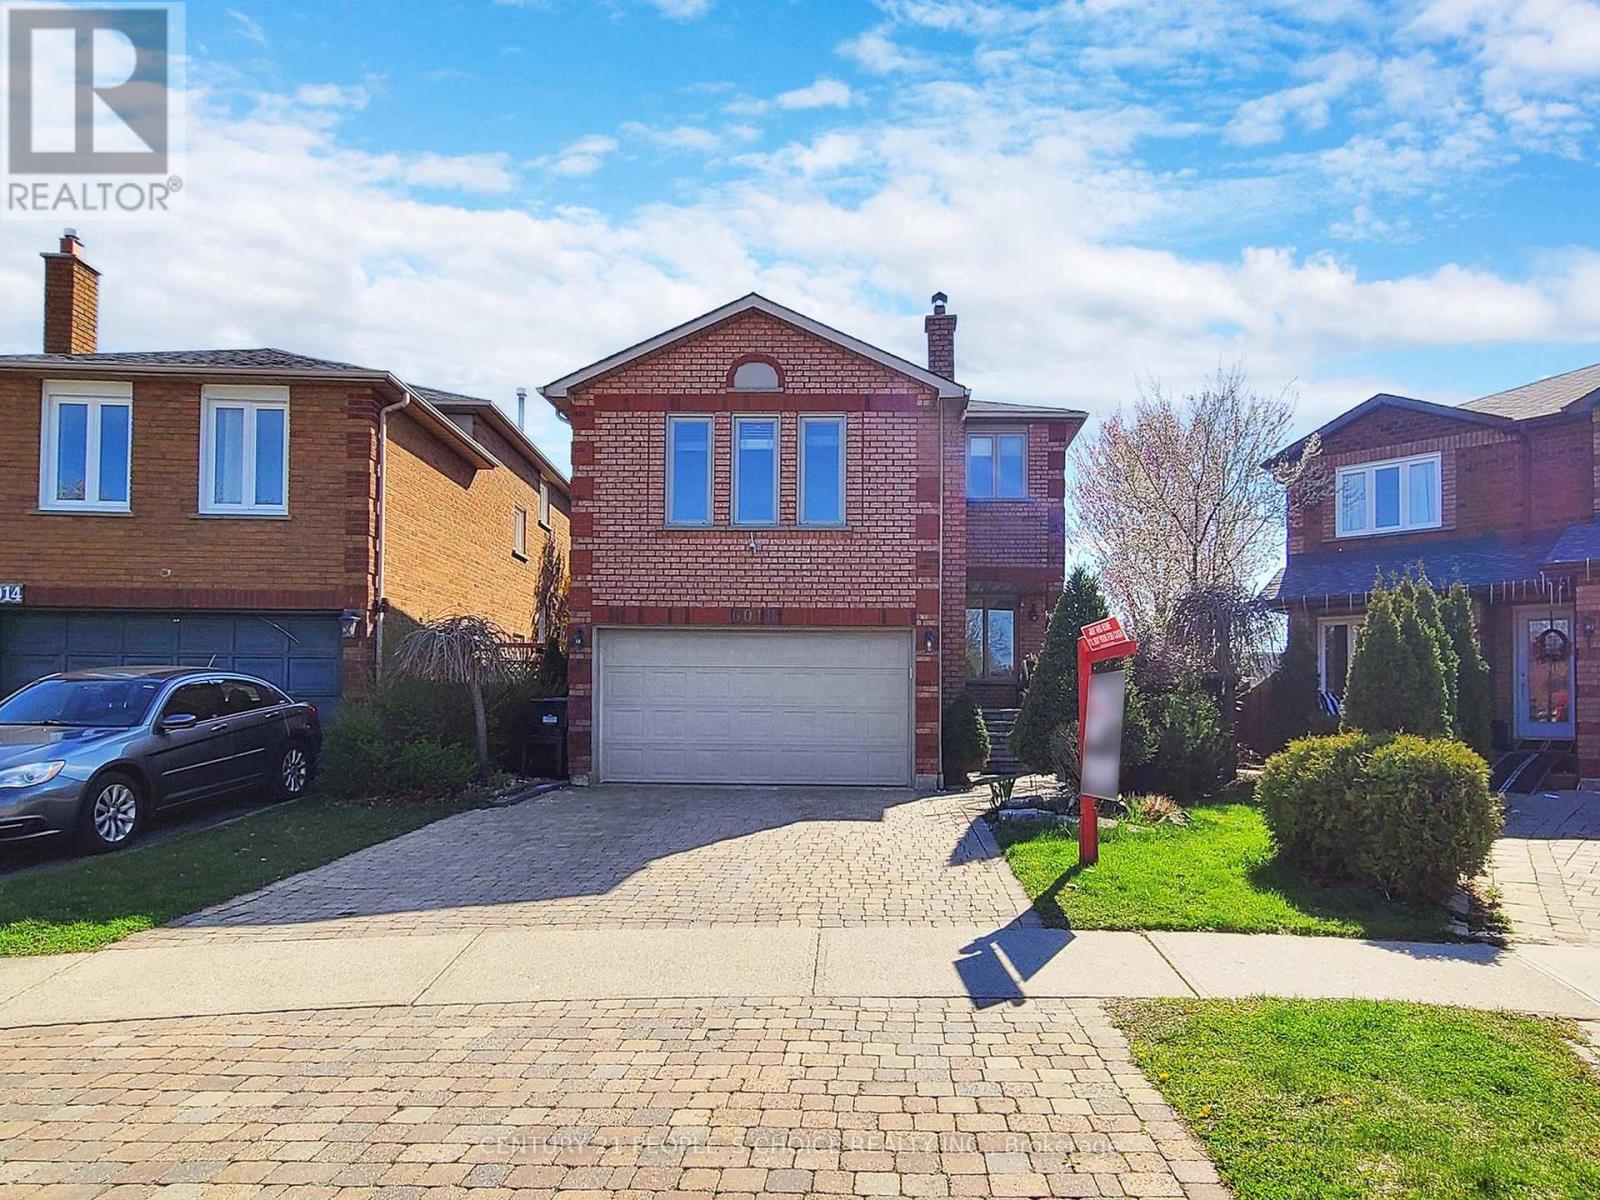 6018 Duford Dr, Mississauga, Ontario  L5V 1A8 - Photo 1 - W8254100